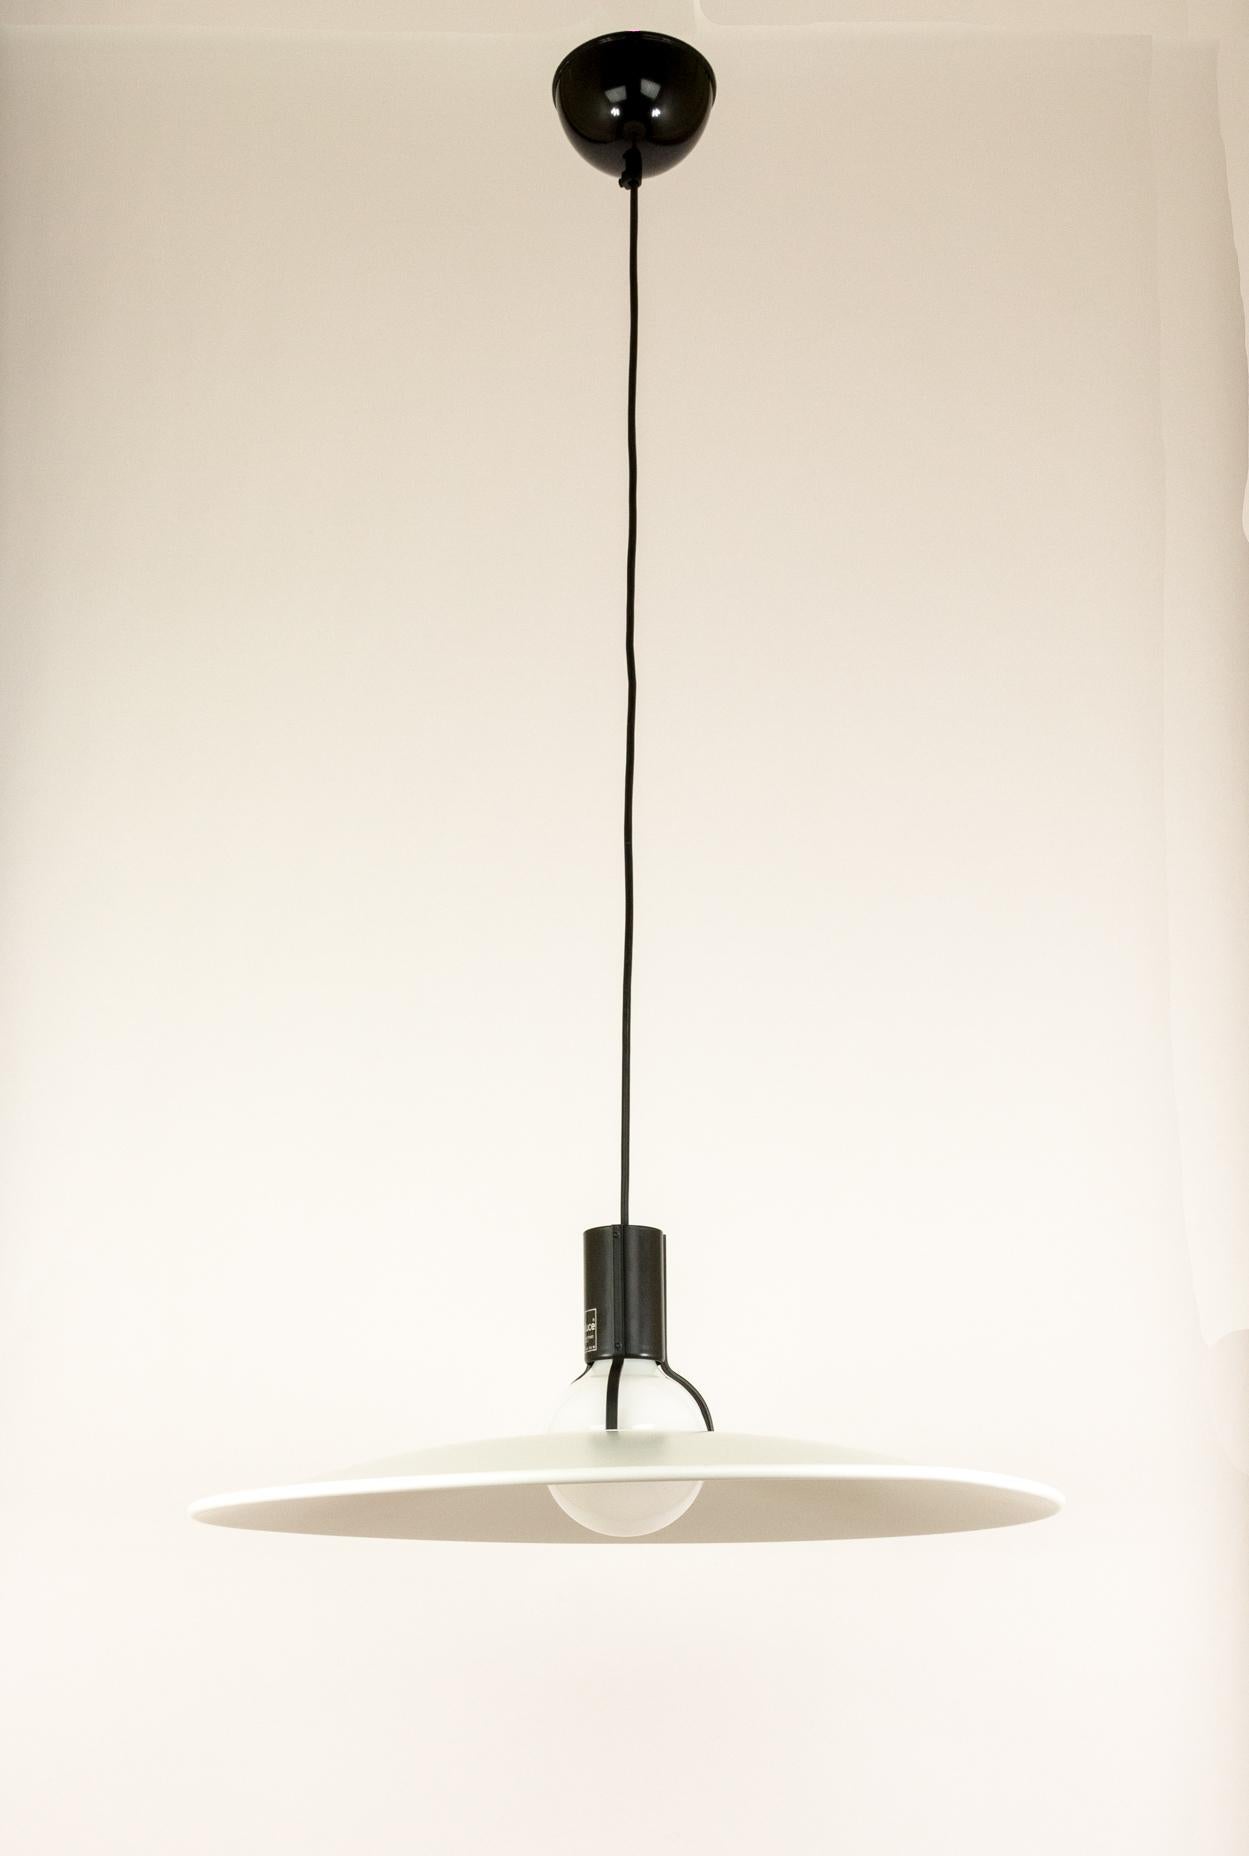 A beautifully balanced pendant, Model 2133, by Gino Sarfatti and produced by Arteluce in Italy.

According to Marco Romanelli and Sandra Severi in their standard work on Gino Sarfatti: “Reflective aluminium plate lacquered white on the bottom